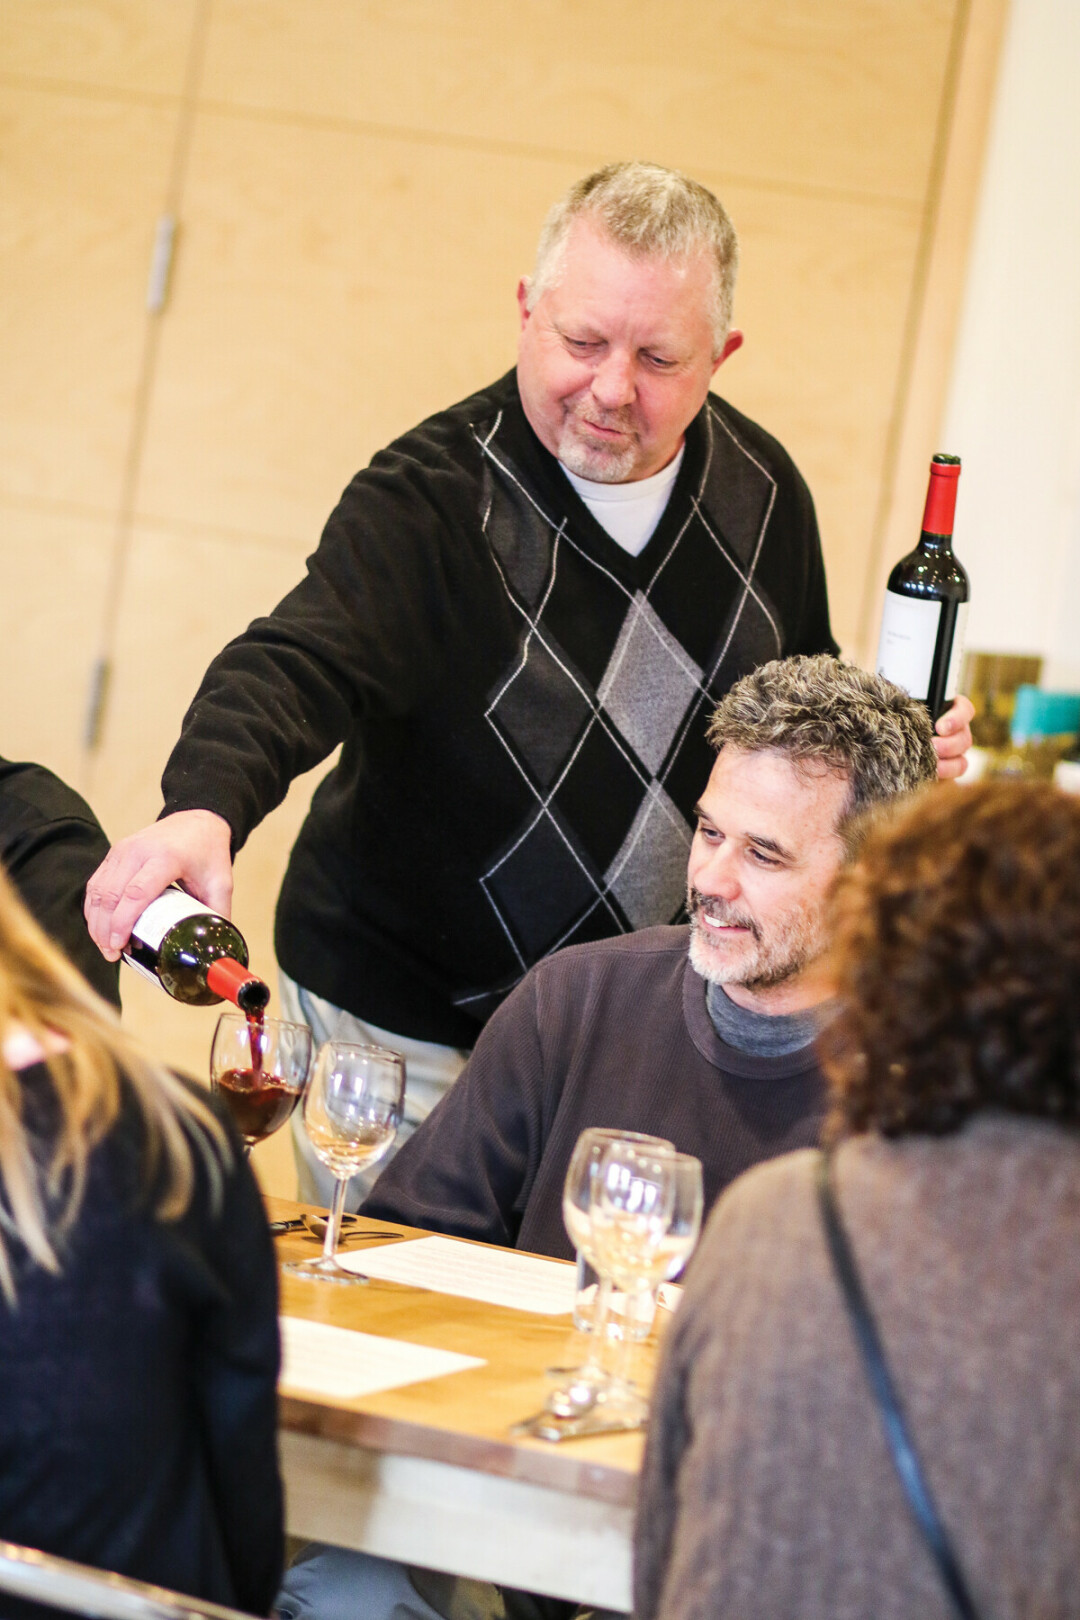 DO YOU KNOW THIS MAN? William Bernier, a.k.a. the Eau Claire Wine Guy, is a wine specialist with Superior-based Saratoga Liquor Co. Here's a photo of Bernier at one of his 2017 classes at Forage in Eau Claire. 